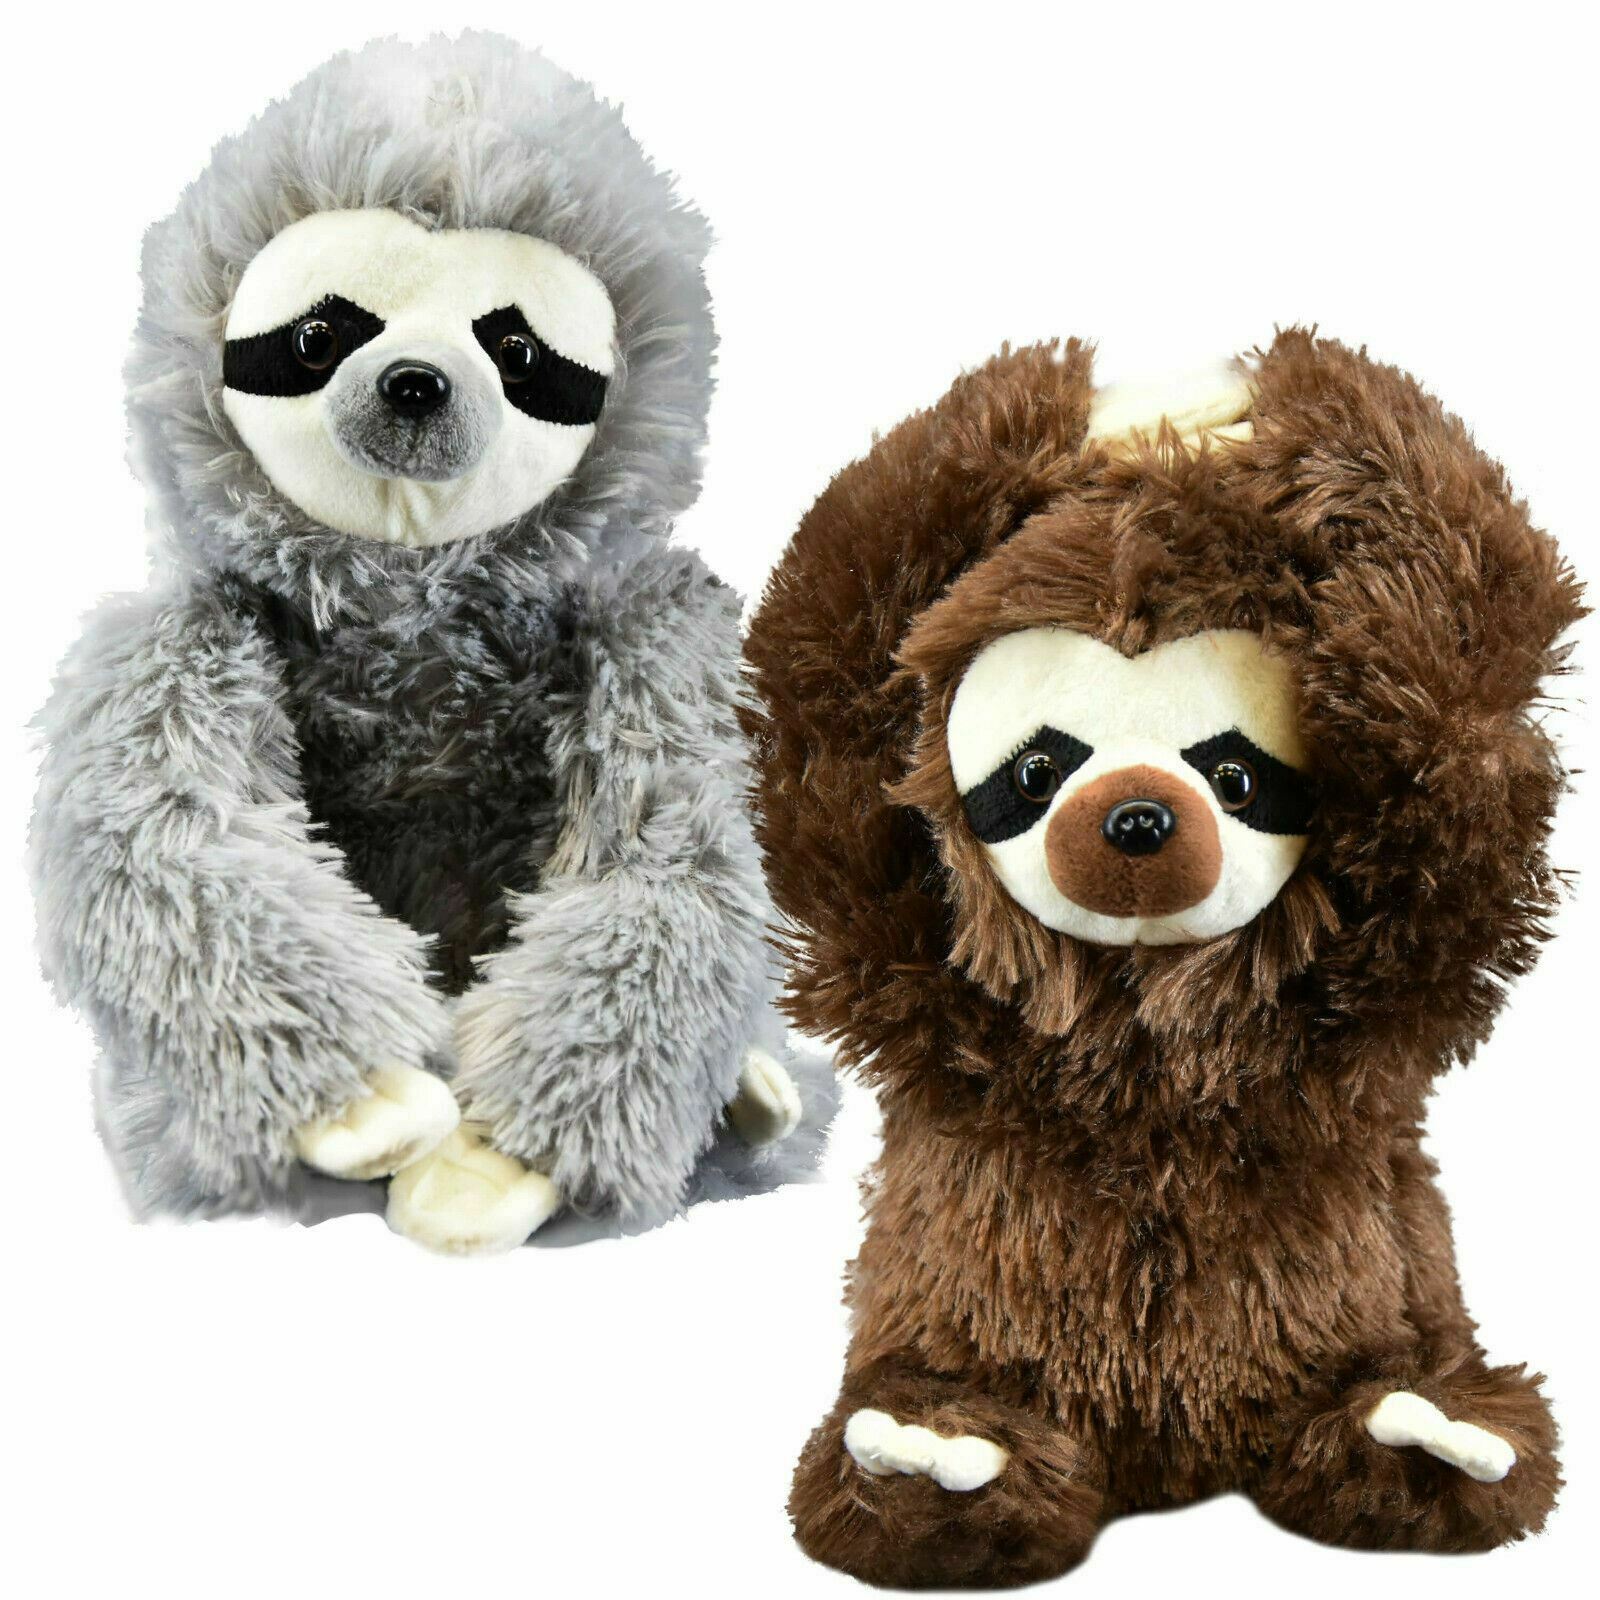 10" Plush Super Soft Hanging Sloth Cuddly Toy The Magic Toy Shop - The Magic Toy Shop